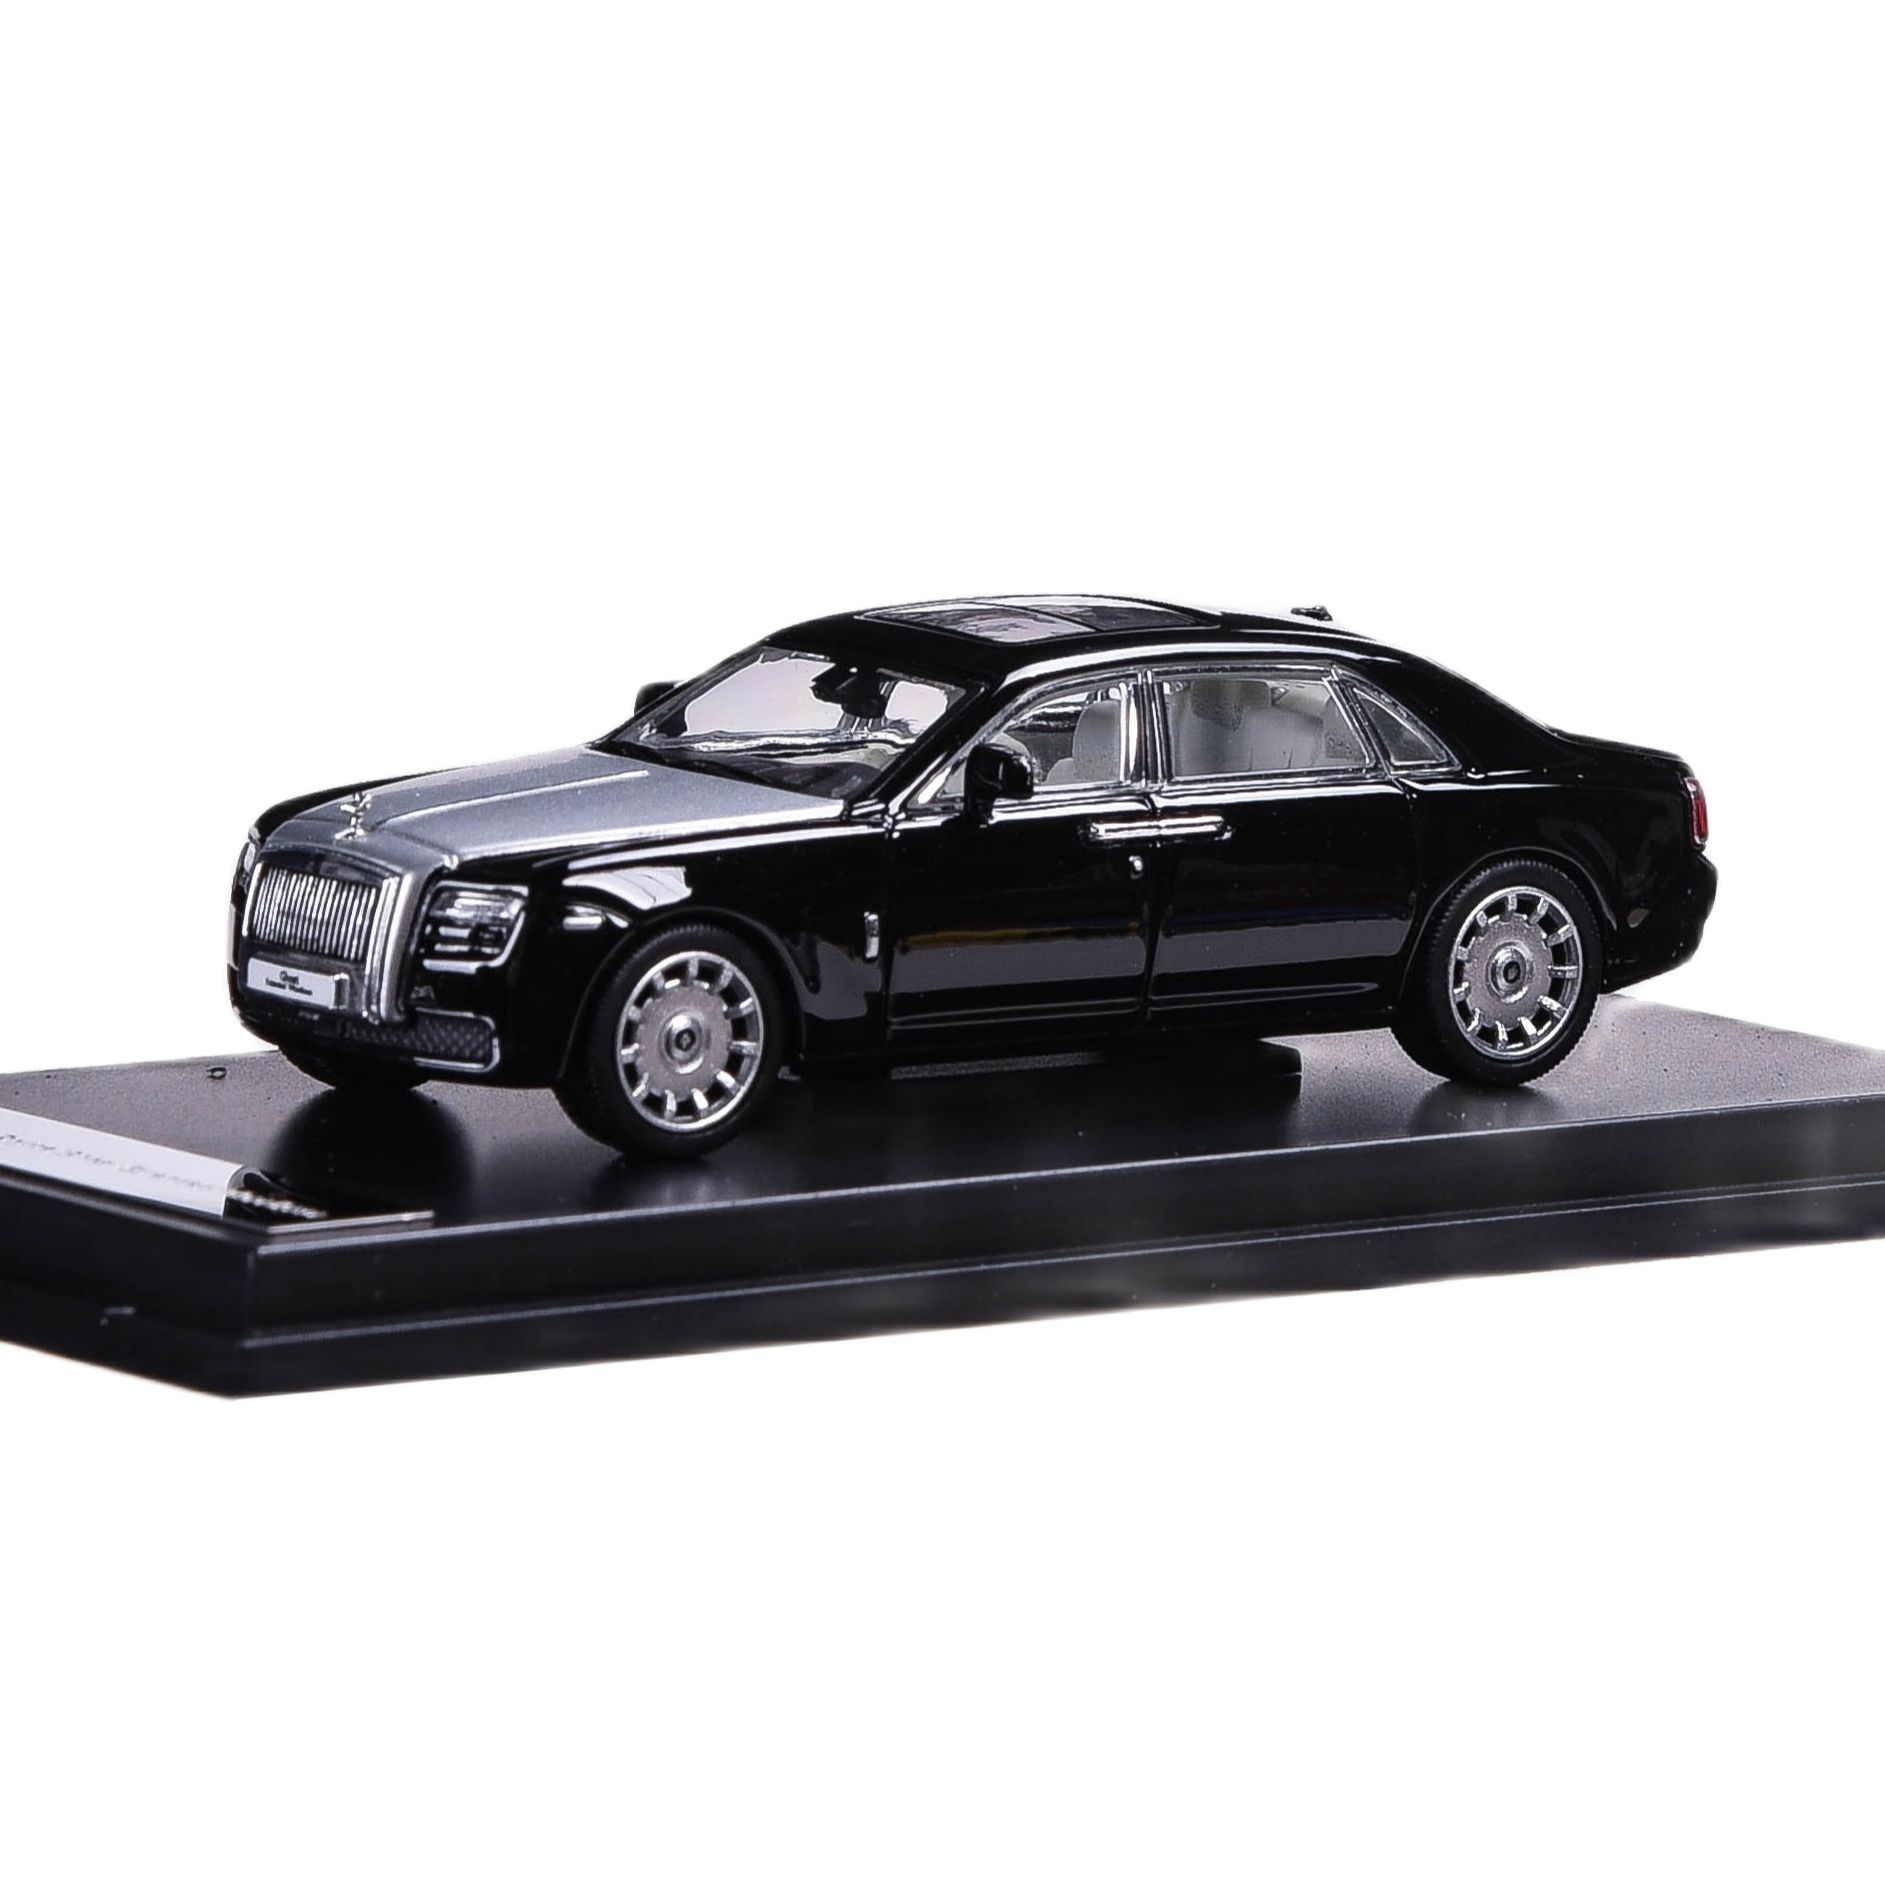 1:64 Rolls -Royce Ghost Extended Wheelbase Alloy Car Model Diecasts Vehicles Car Model Simulation Collection Kids Adult Gift alx